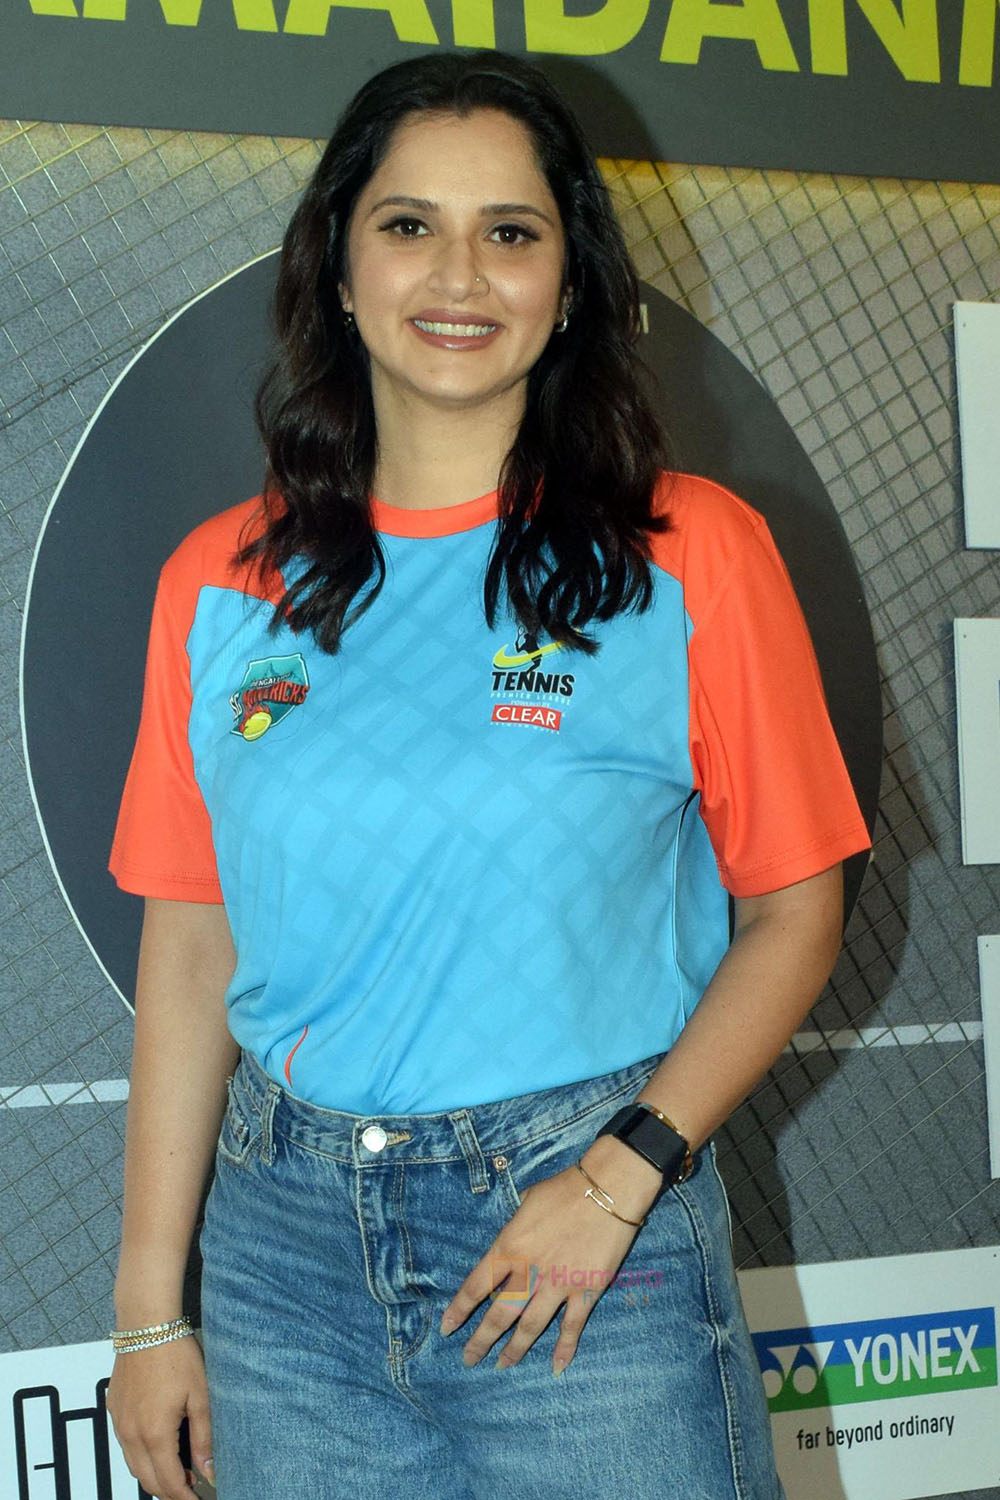 Sania Mirza attends the Tennis Premiere League Season 5 Auction on 1st Oct 2023